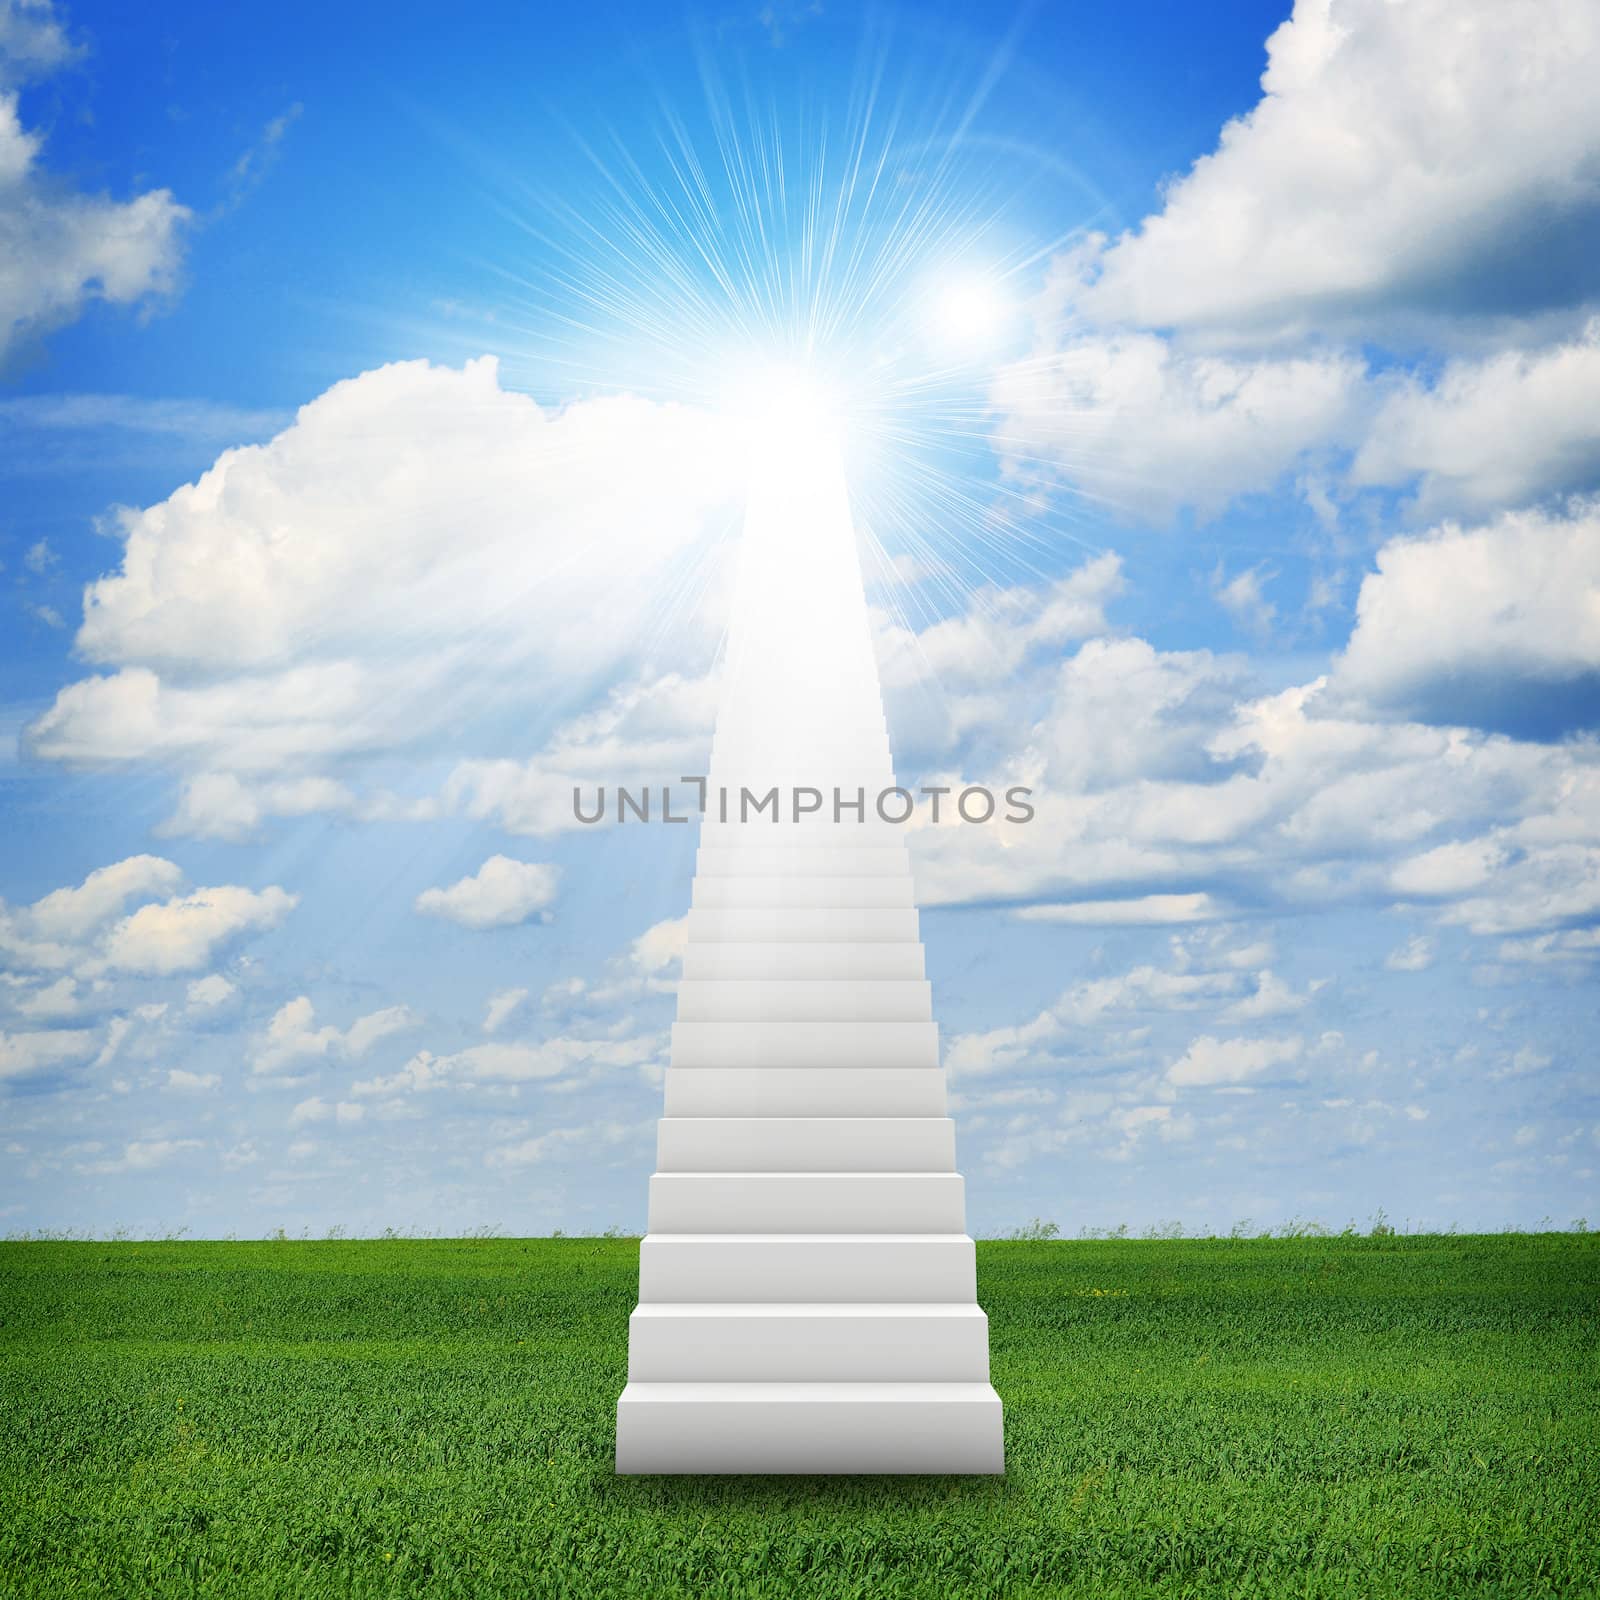 Stairs in sky with green grass, clouds and sun. Concept background